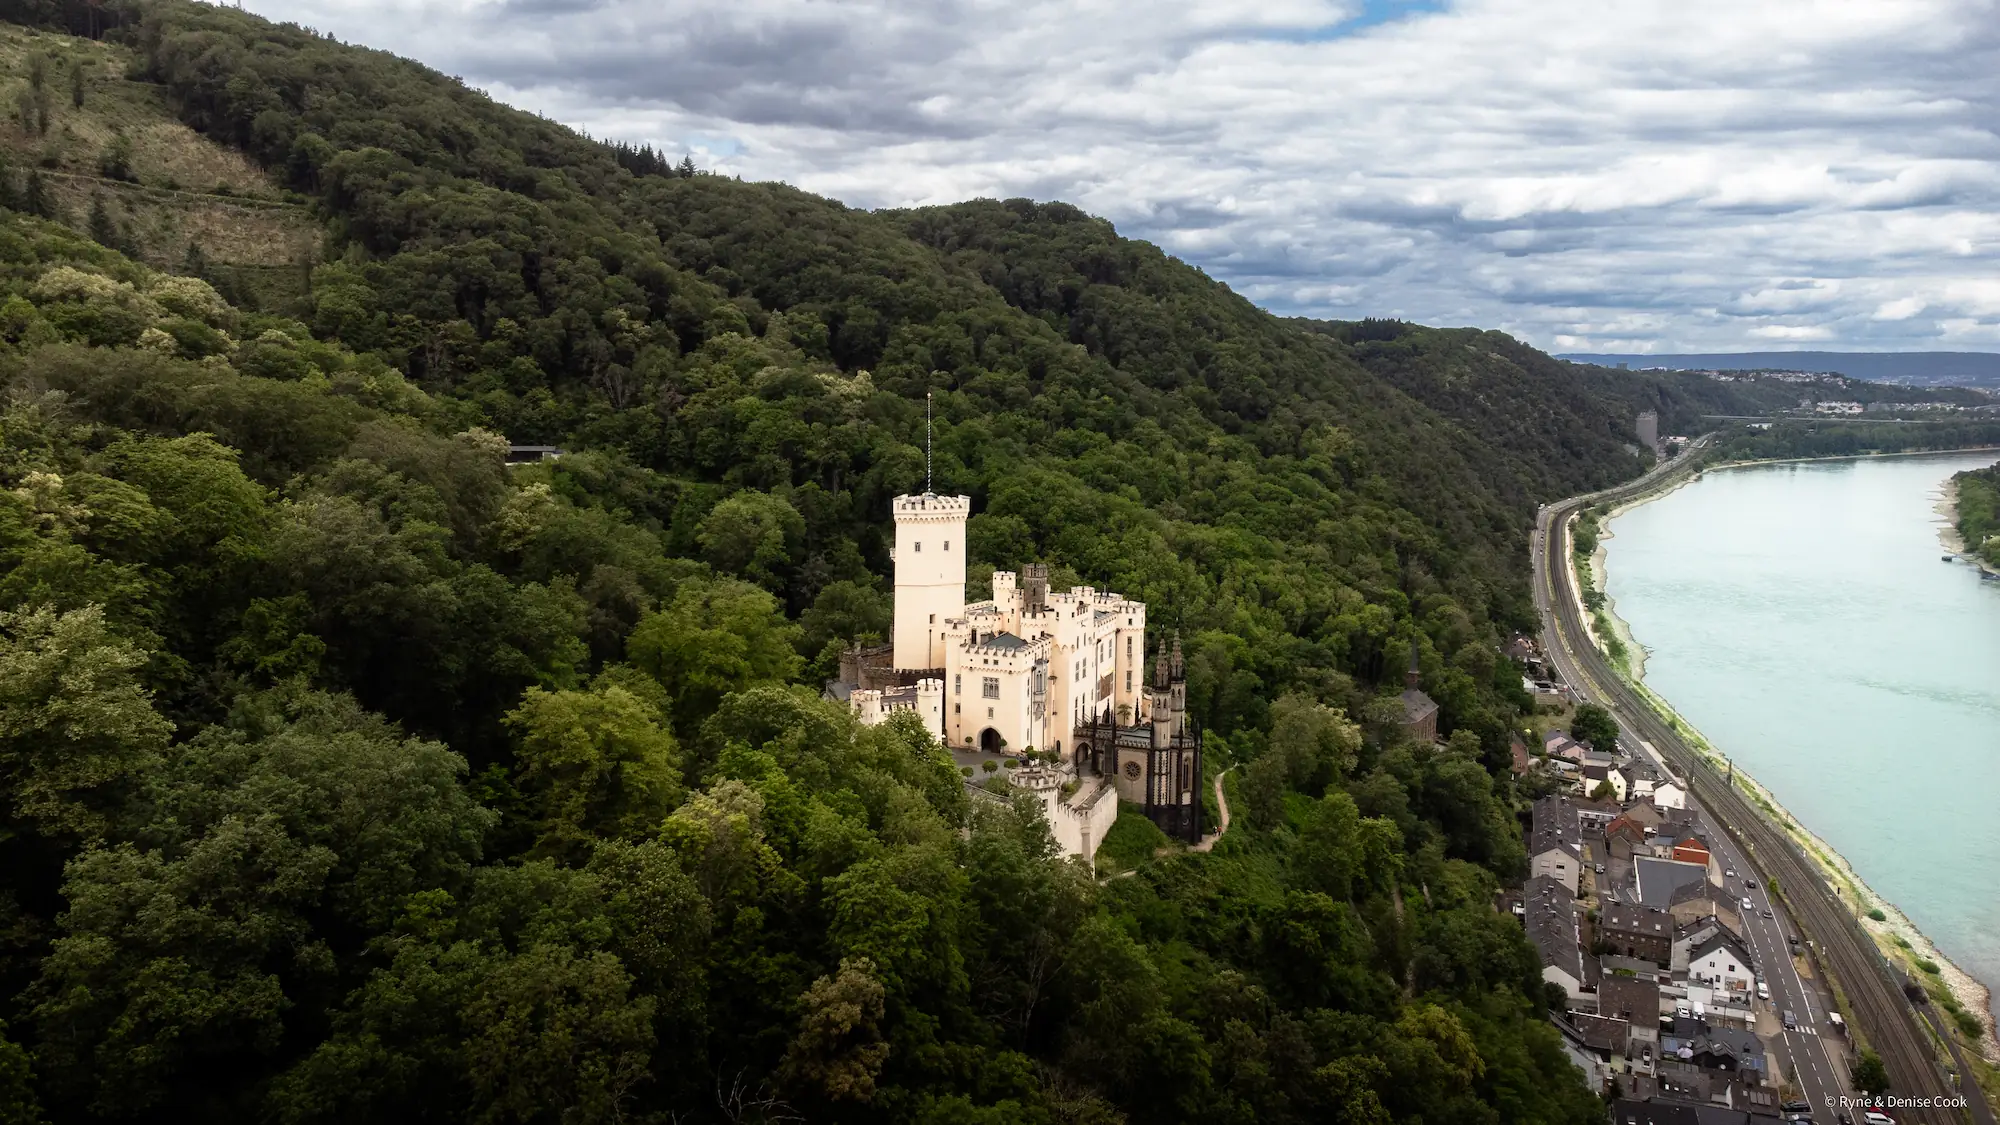 Aerial photo of Stolzenfels castle with a lush forest behind it and the Rhine river in view.